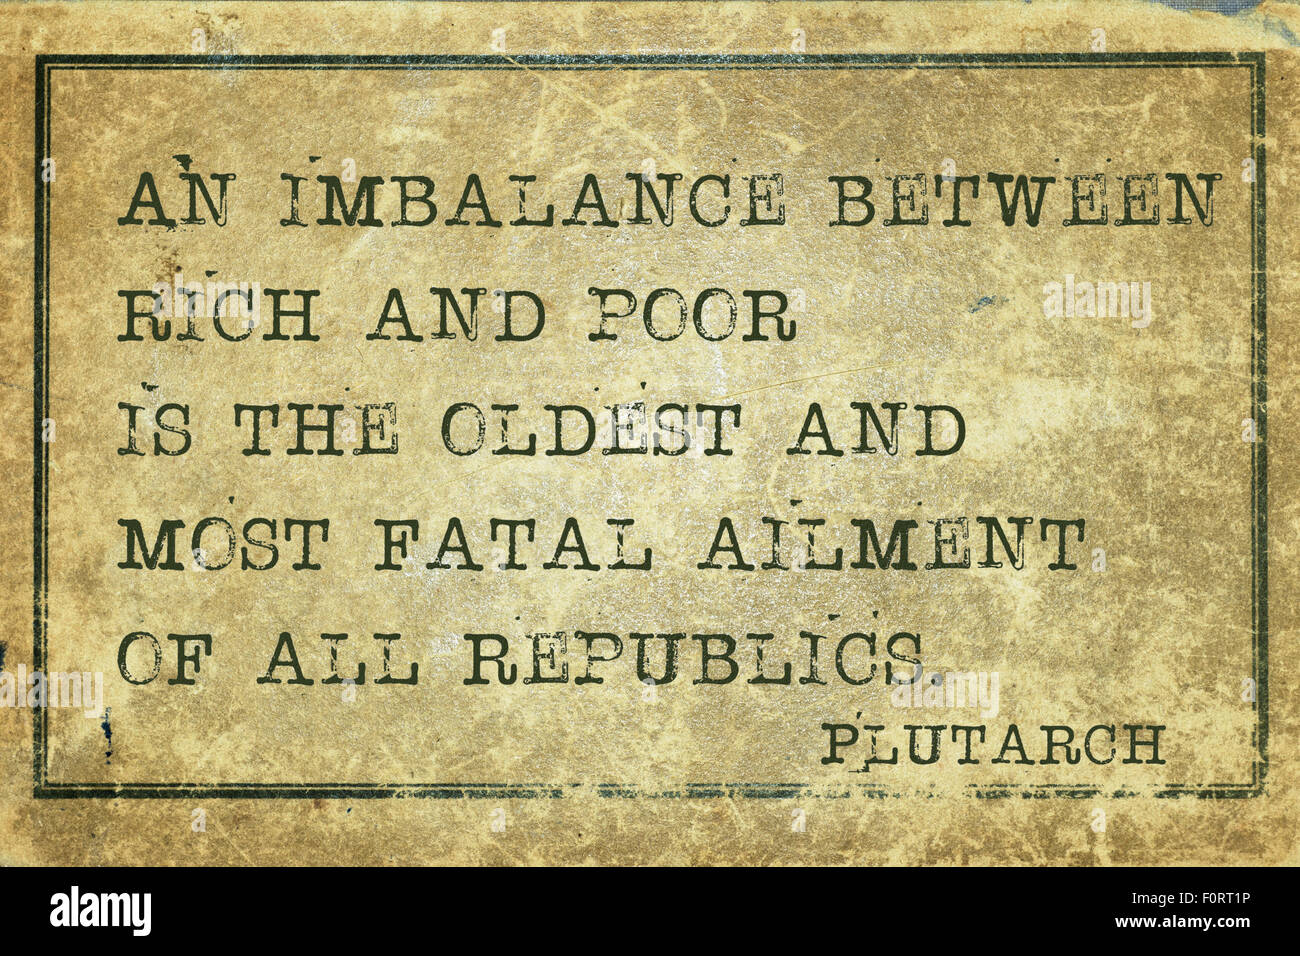 An imbalance between rich and poor  - ancient Greek philosopher Plutarch quote printed on grunge vintage cardboard Stock Photo